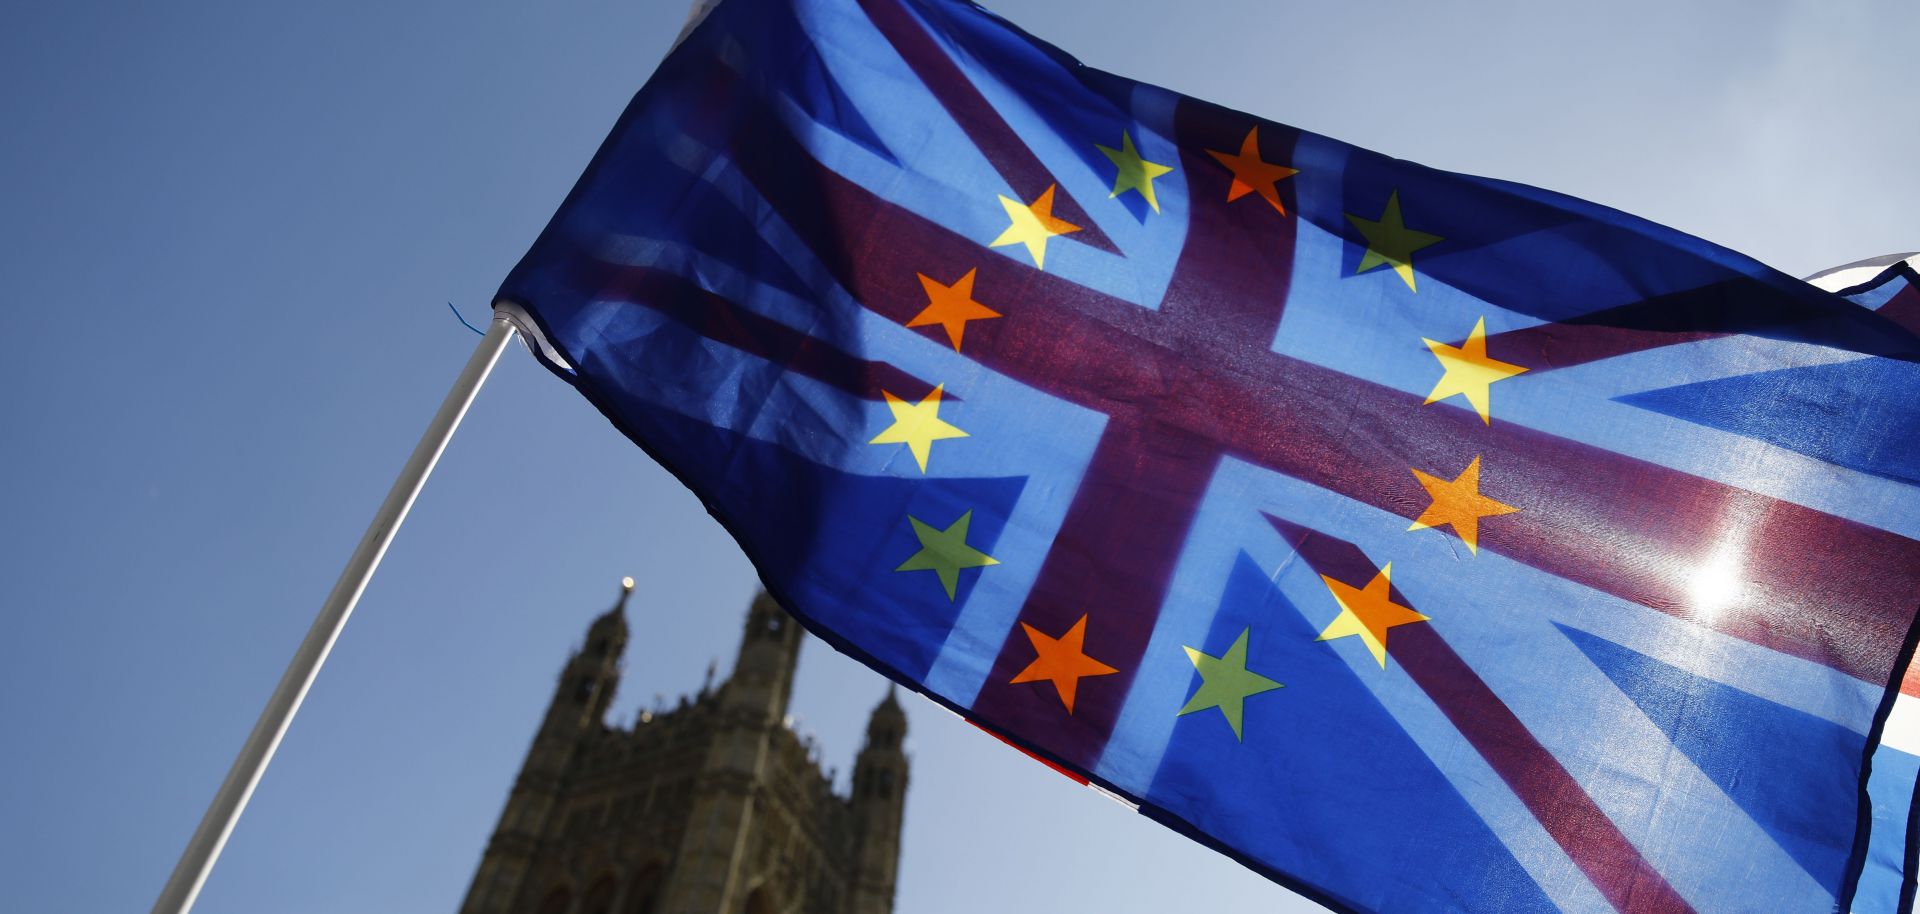 An activist waves a combination of the Union Jack and EU flags near the British Houses of Parliament in London on April 10, 2019.